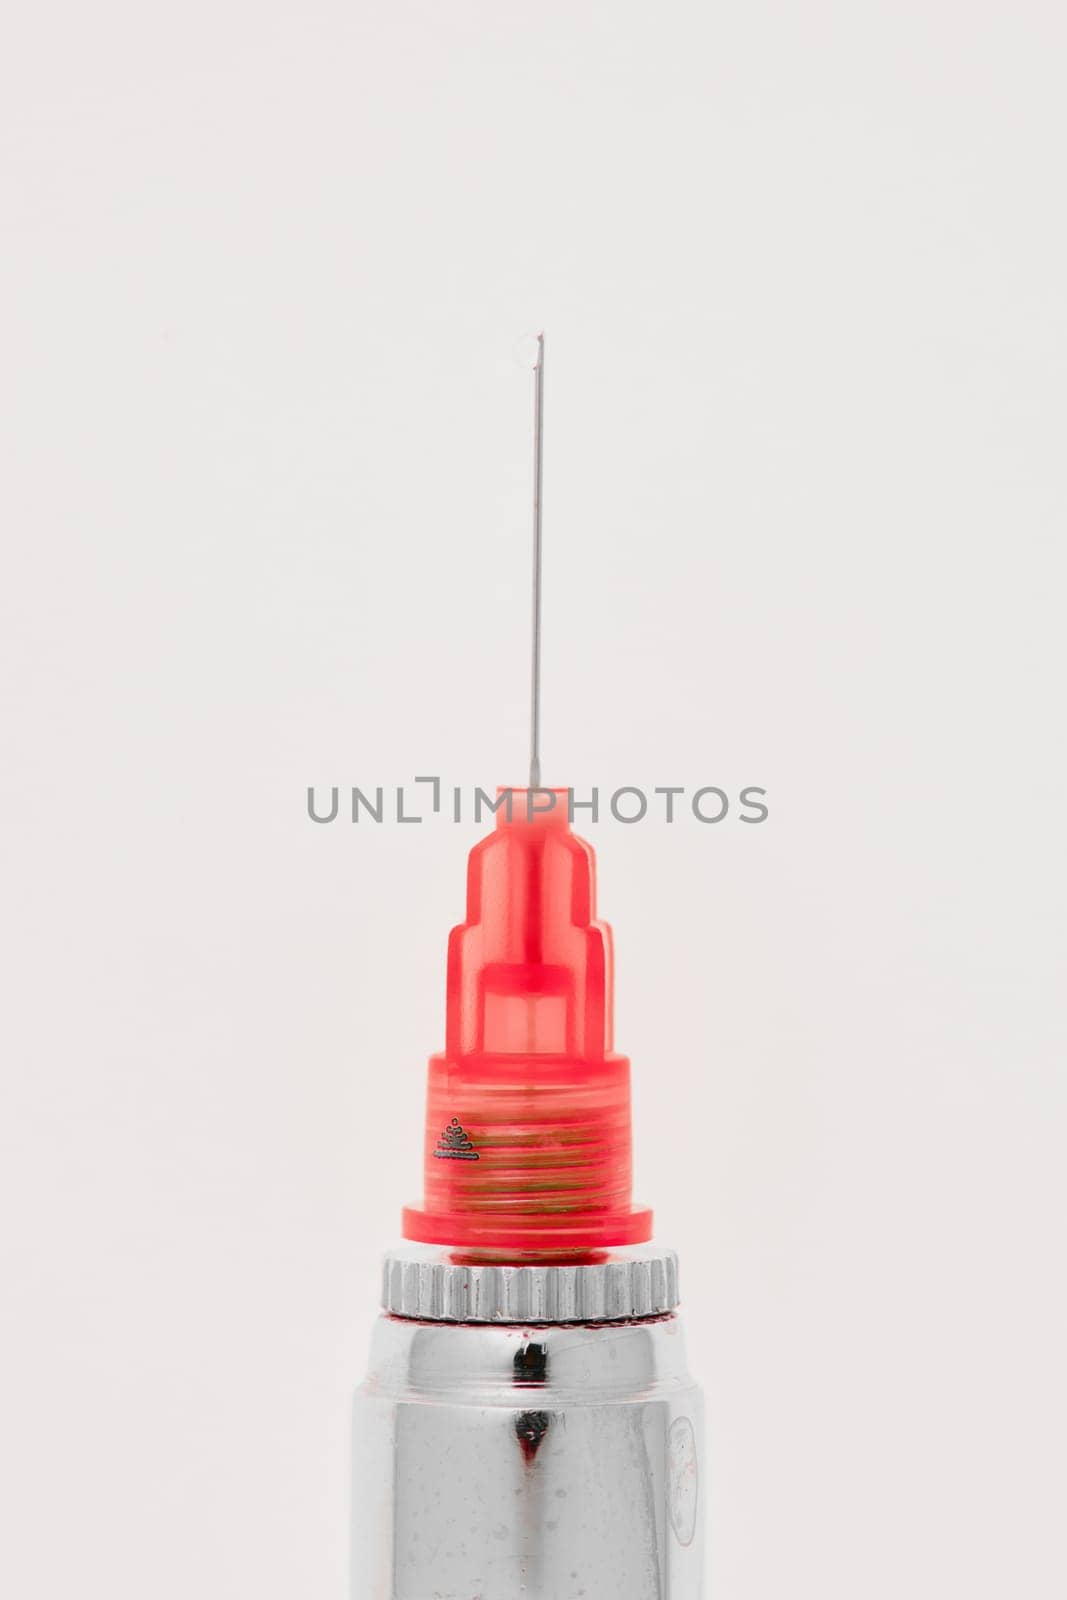 Steel dental syringe for local anesthesia, isolated on white. Carpool syringe for anesthesia in dentistry. Thin needle on a syringe for anesthesia in dentistry.